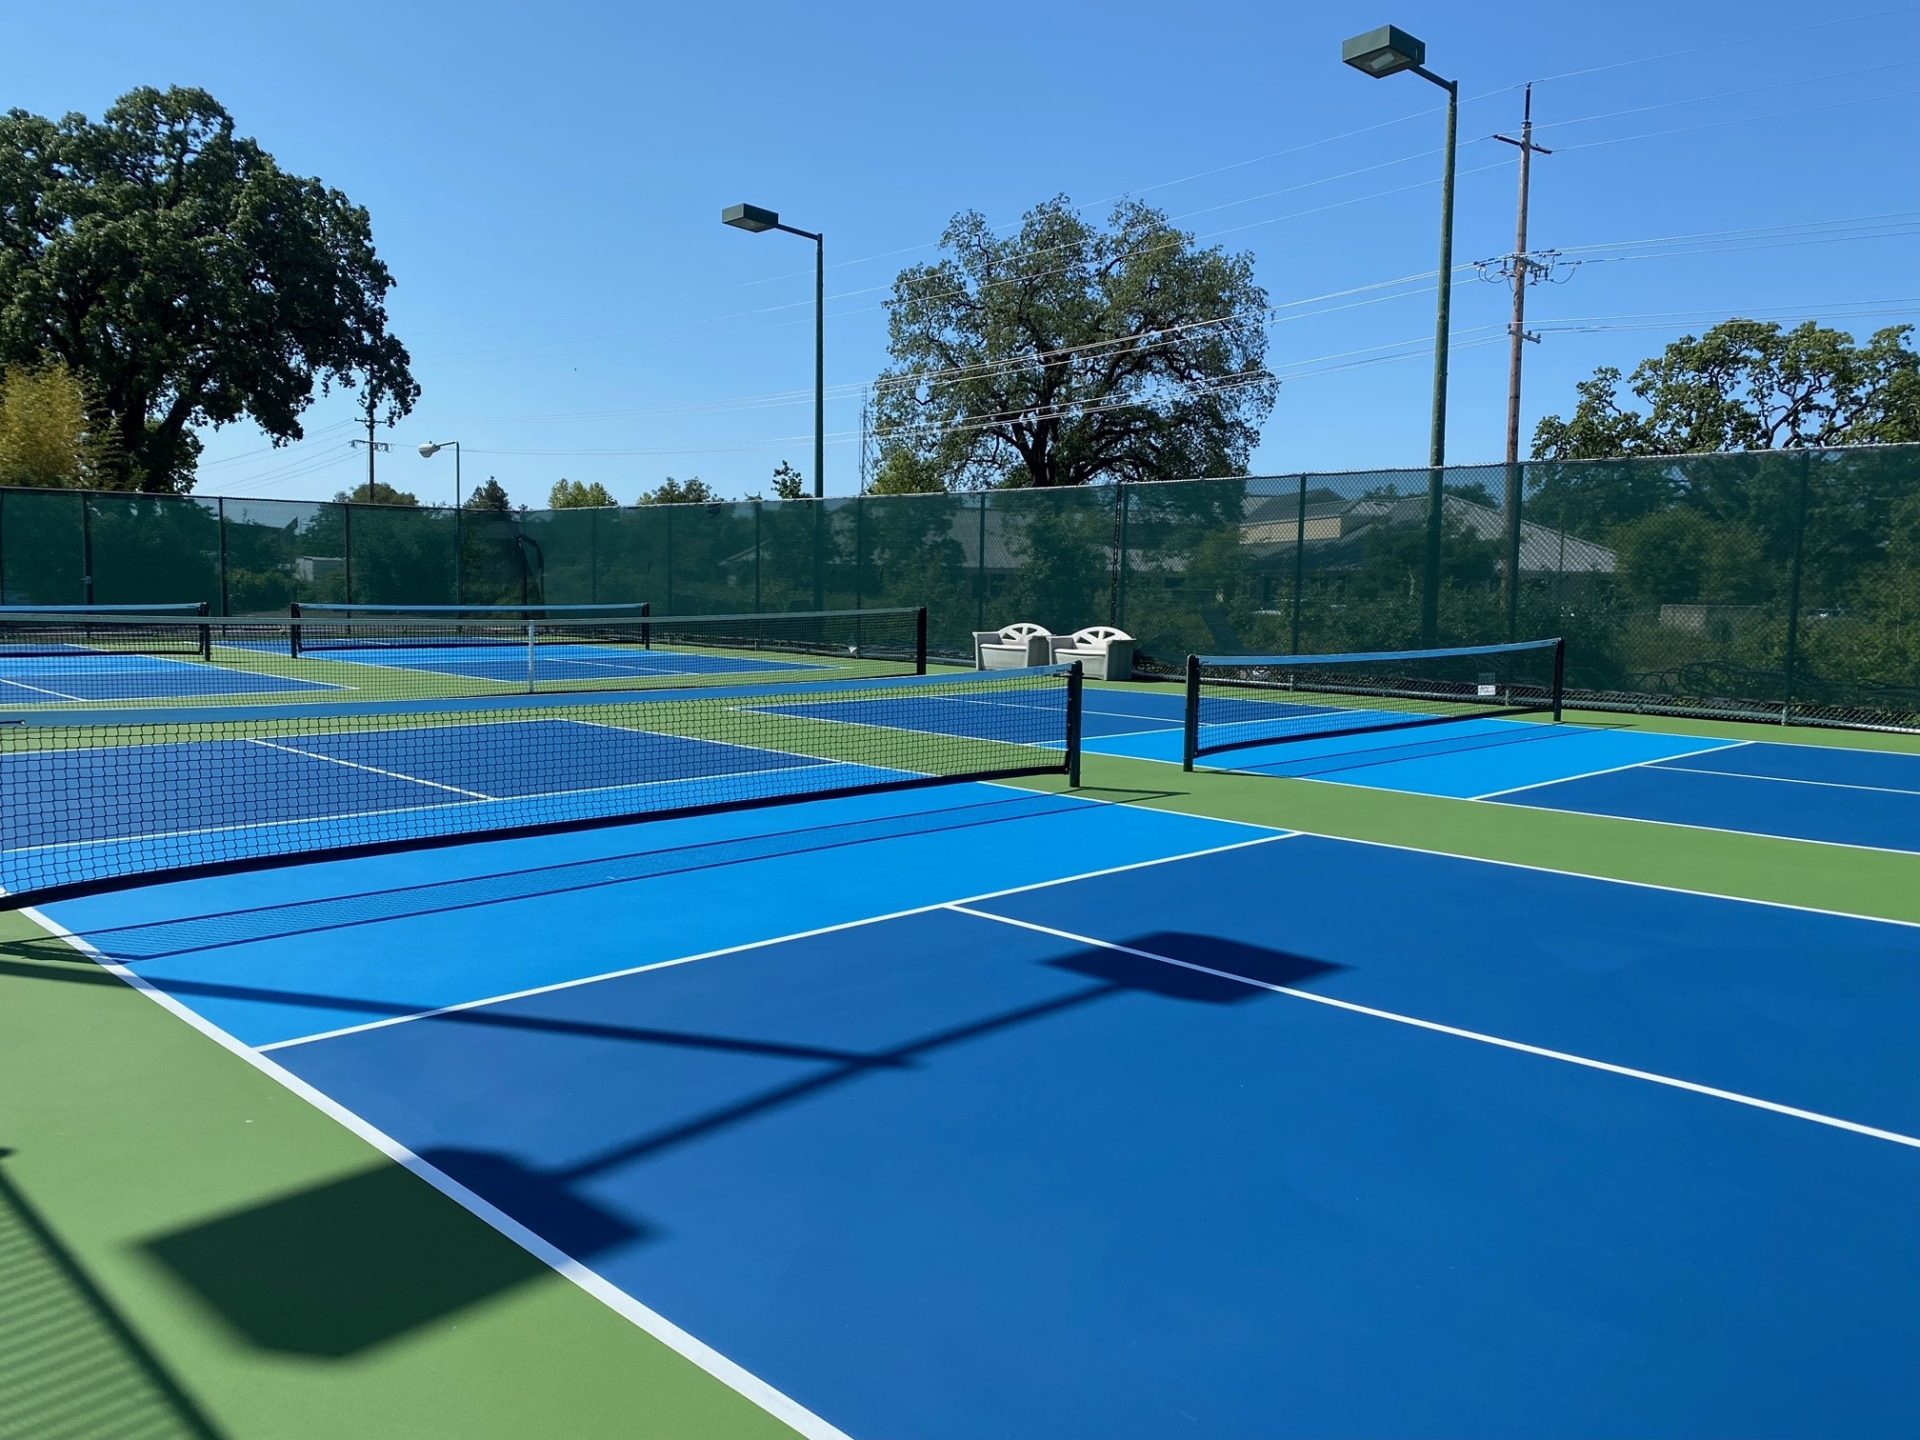 Pickleball Courts at Airport Health Club